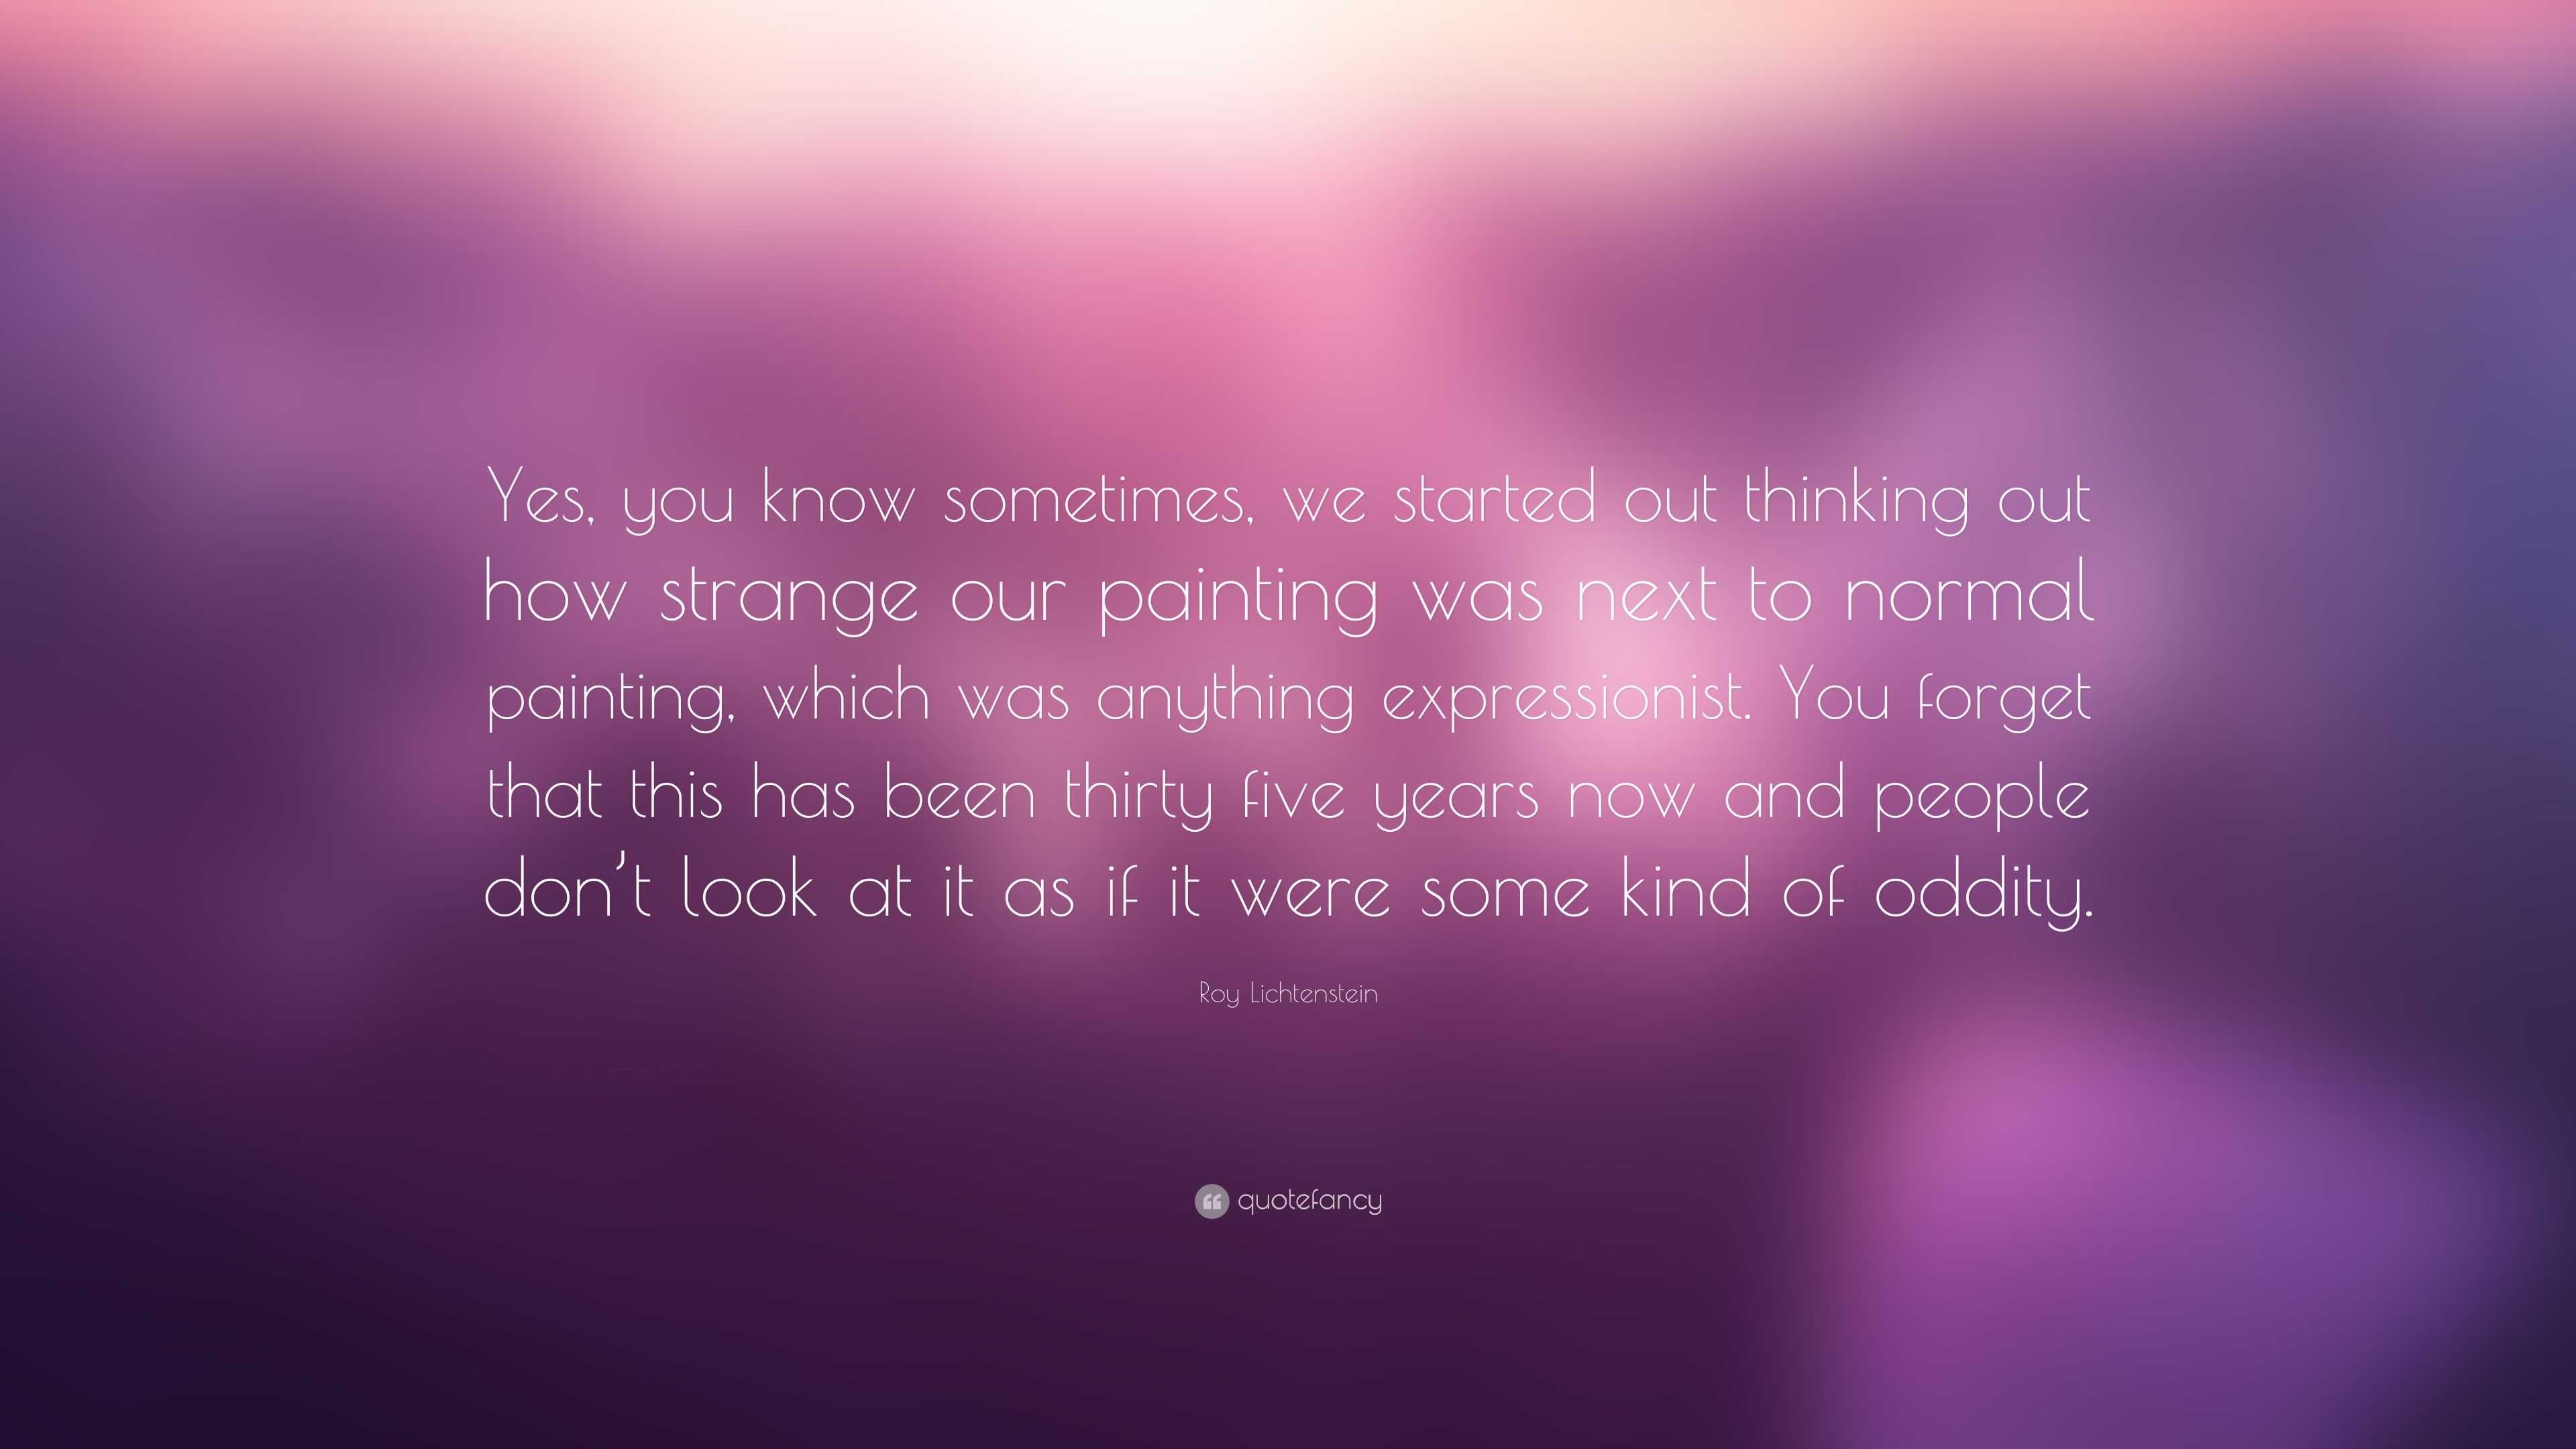 Roy Lichtenstein Quote: "Yes, you know sometimes, we started out thinking out how strange our ...